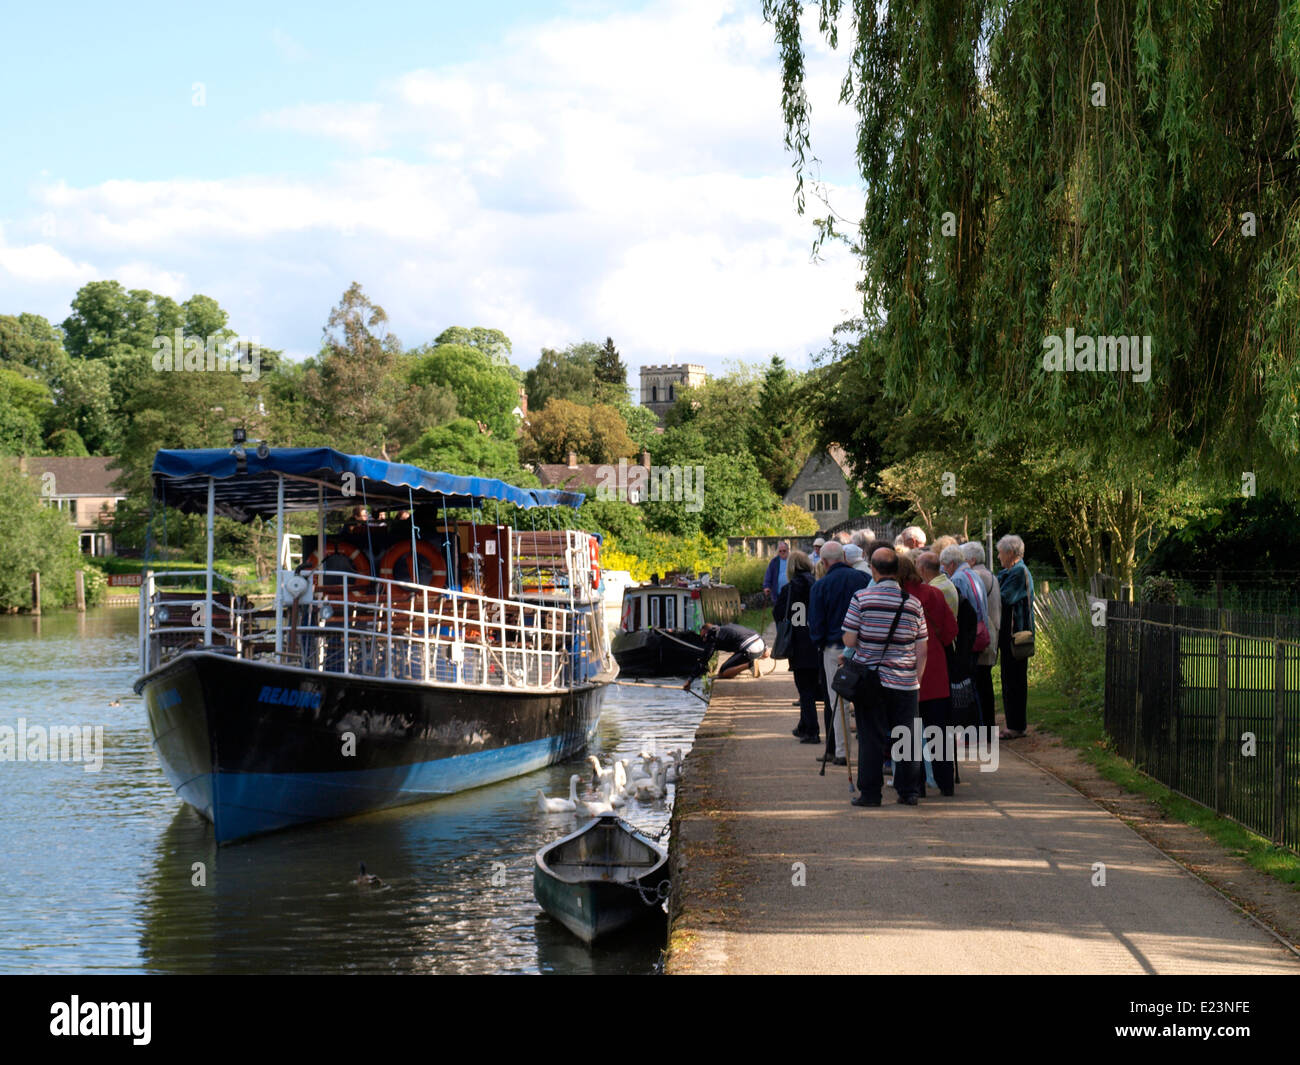 People waiting to board sightseeing riverboat for an evening cruise along the River Thames, Oxford, UK Stock Photo